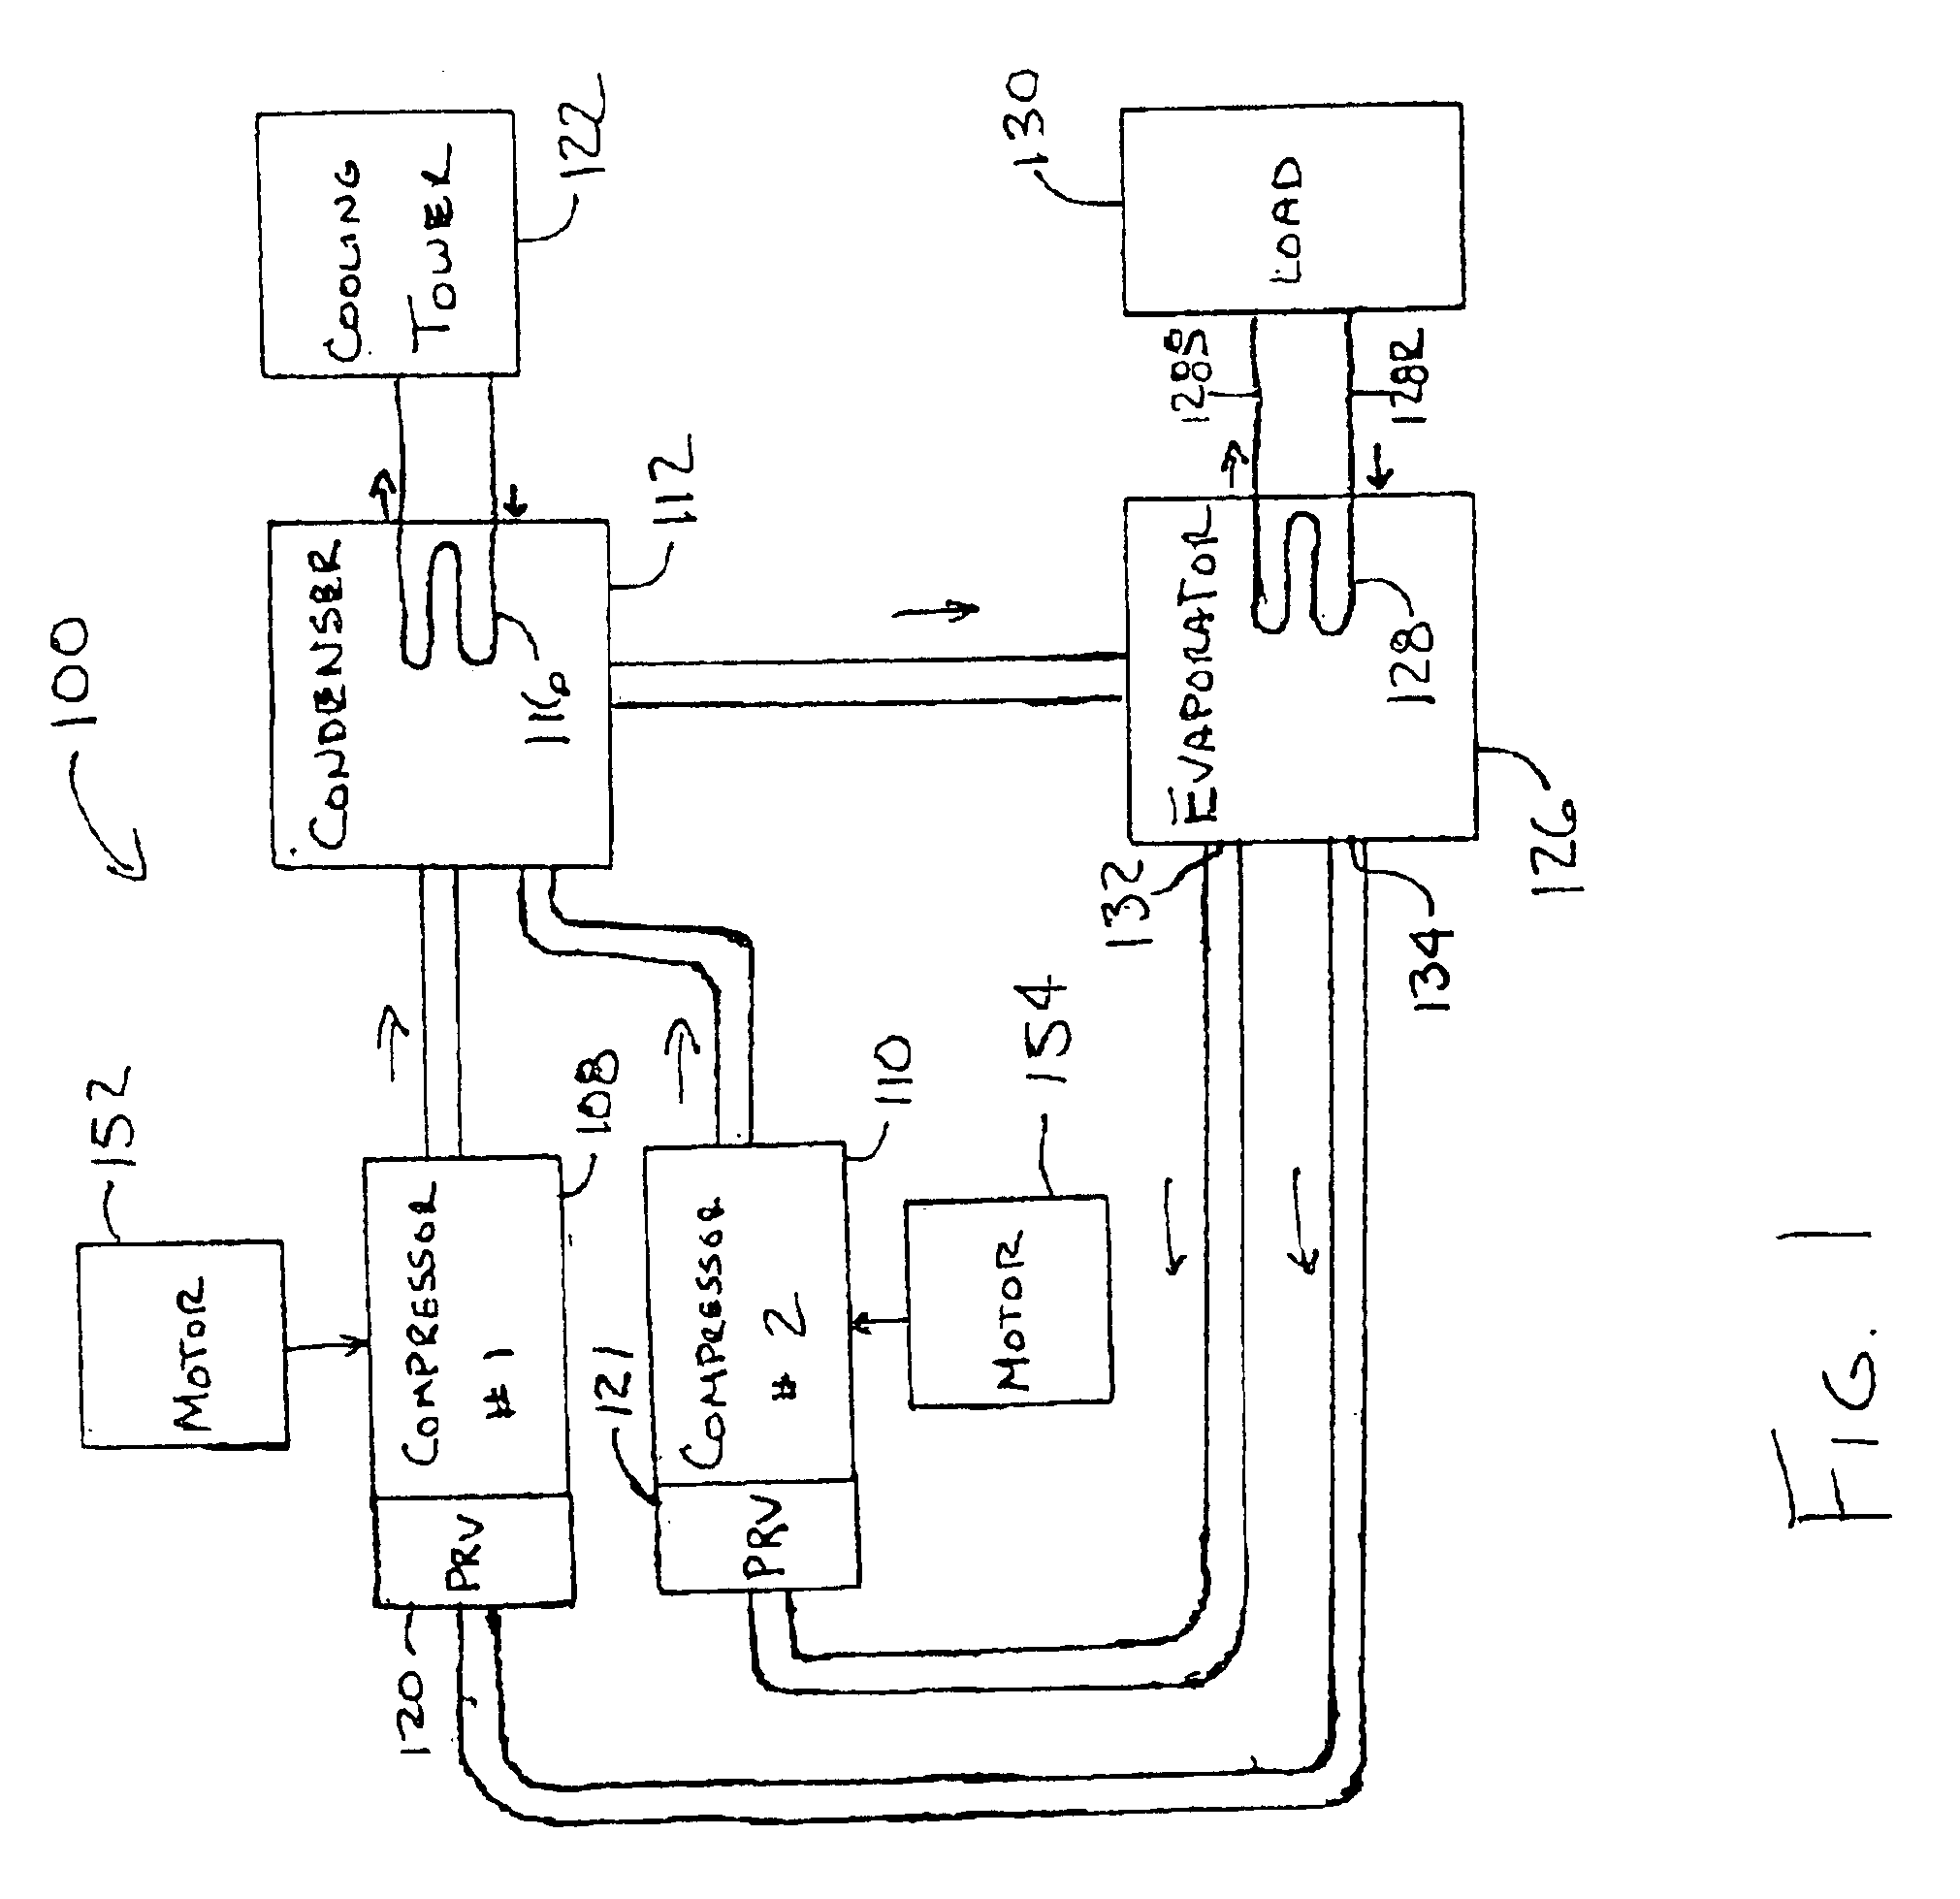 Suction connection for dual centrifugal compressor refrigeration systems